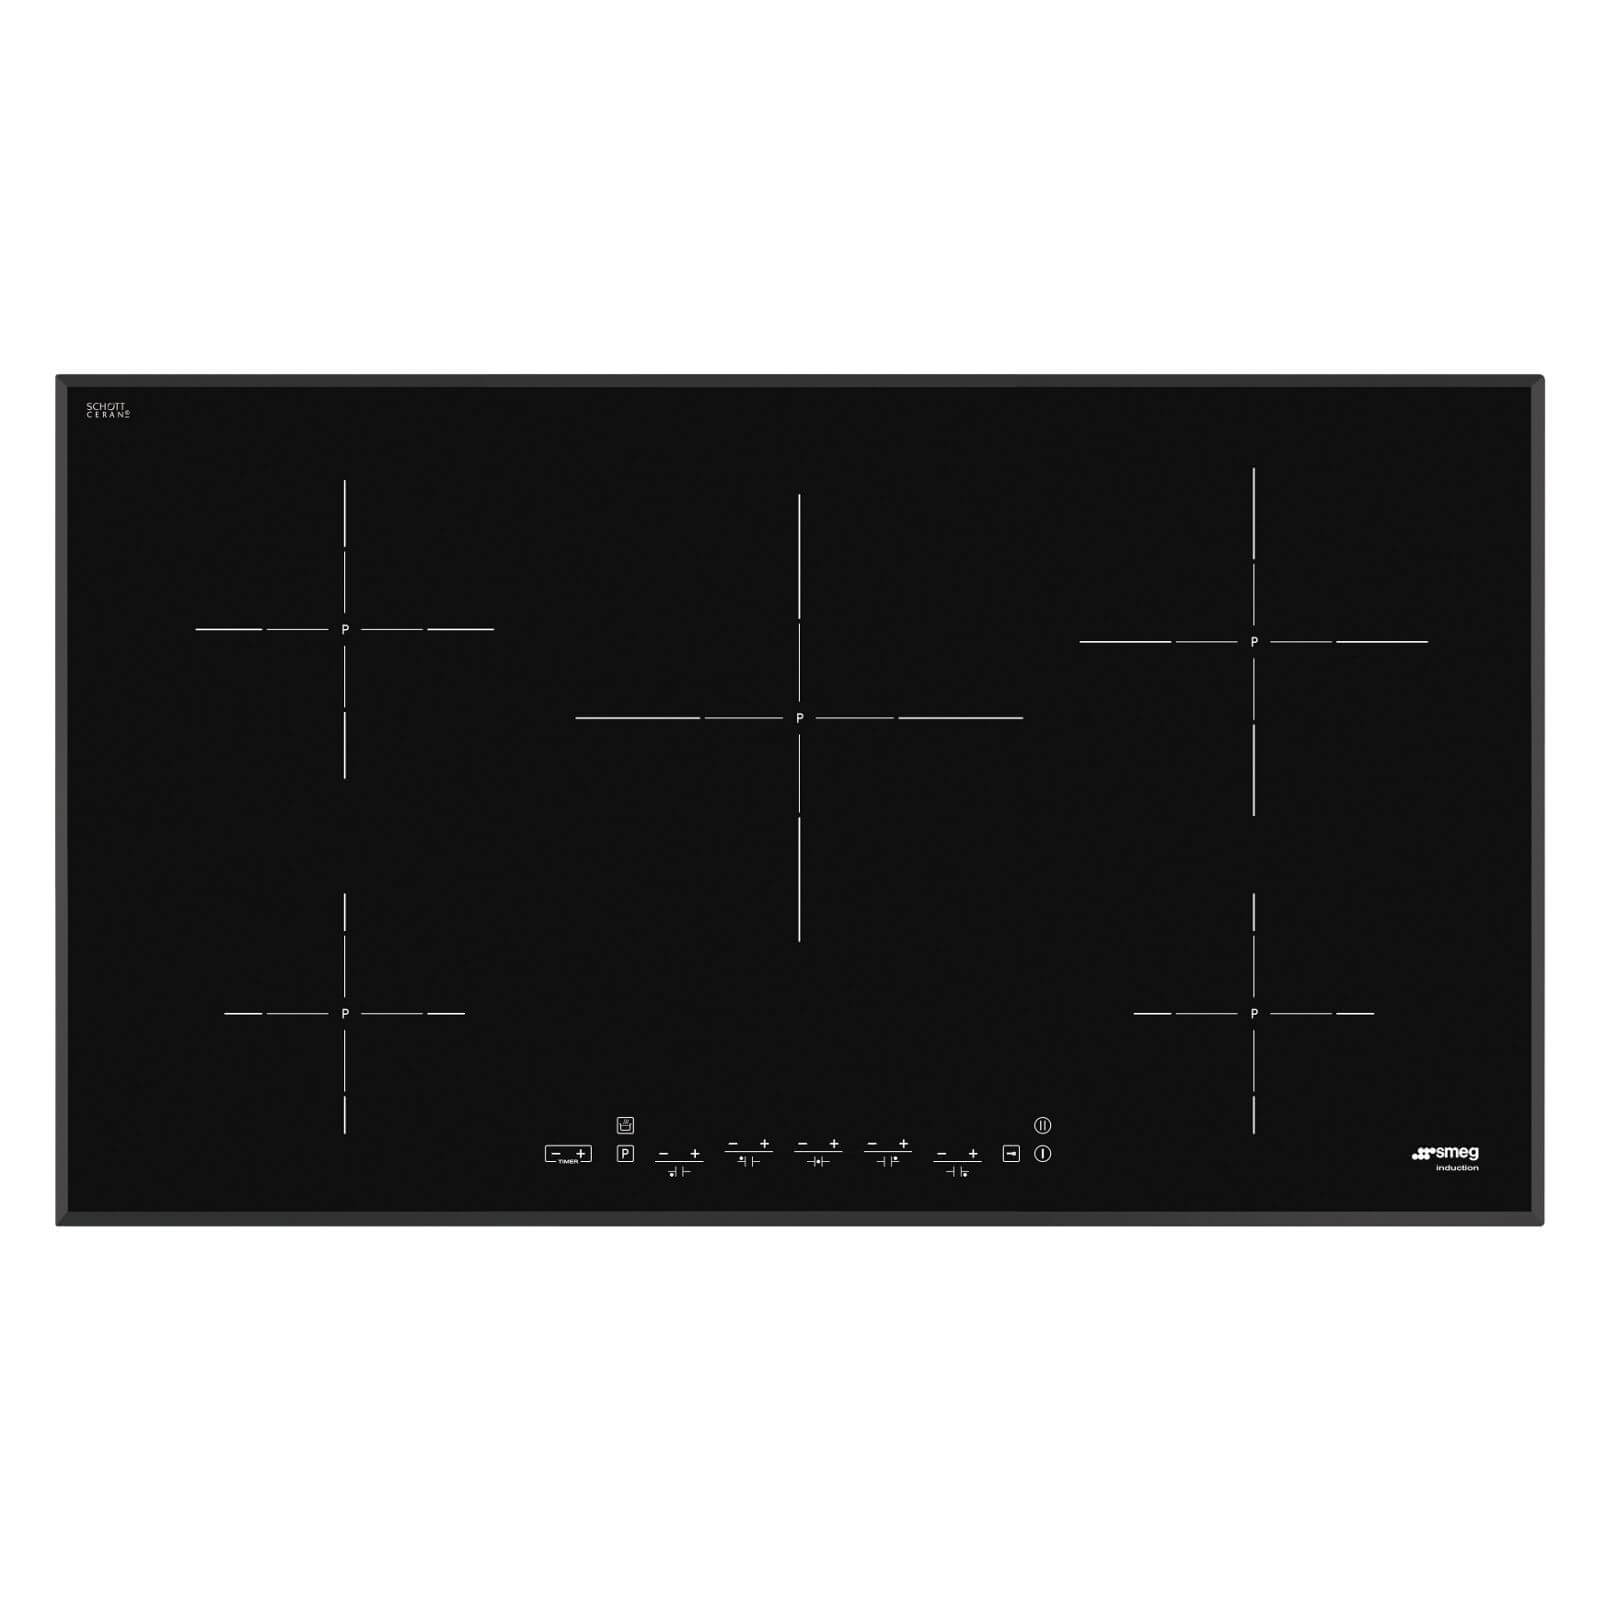 Smeg SI5952B 5 Zone Touch Inducuction Hob - 90cm